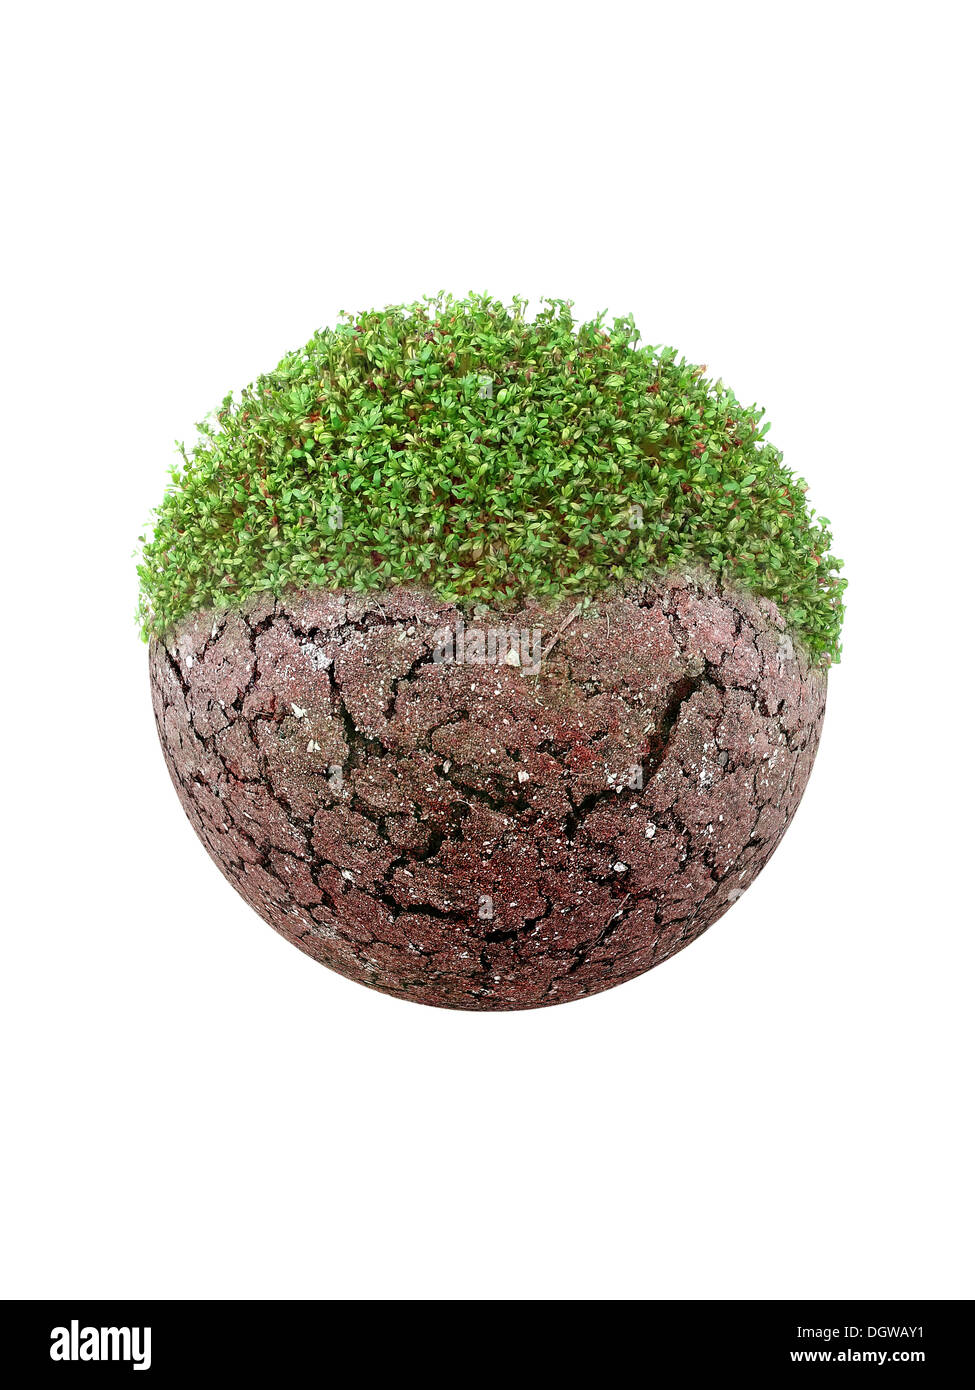 Cracked planet being covered by verdure shot on white Stock Photo